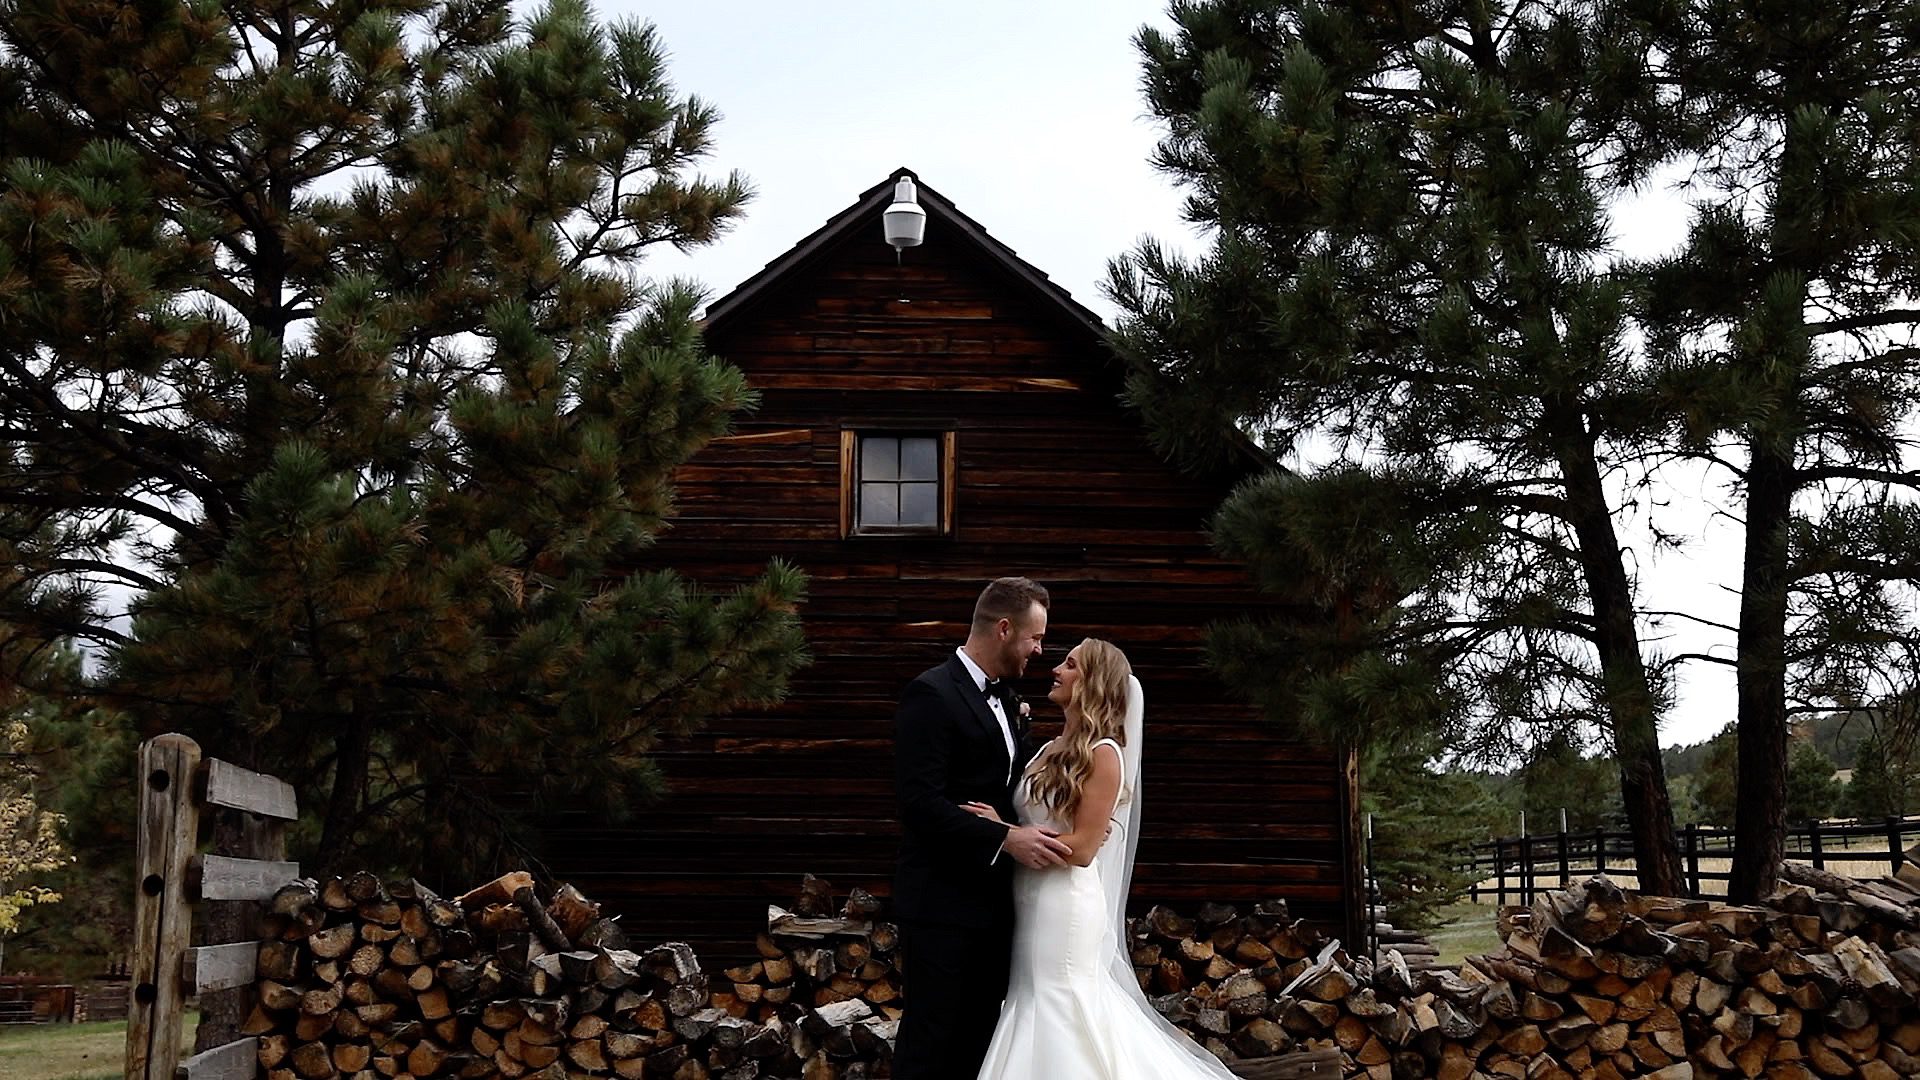 Spruce Mountain Ranch Videographer, Spruce Mountain Ranch Videography, Spruce Mountain Ranch wedding, Spruce Mountain Ranch wedding video, Spruce Mountain Ranch wedding videographer